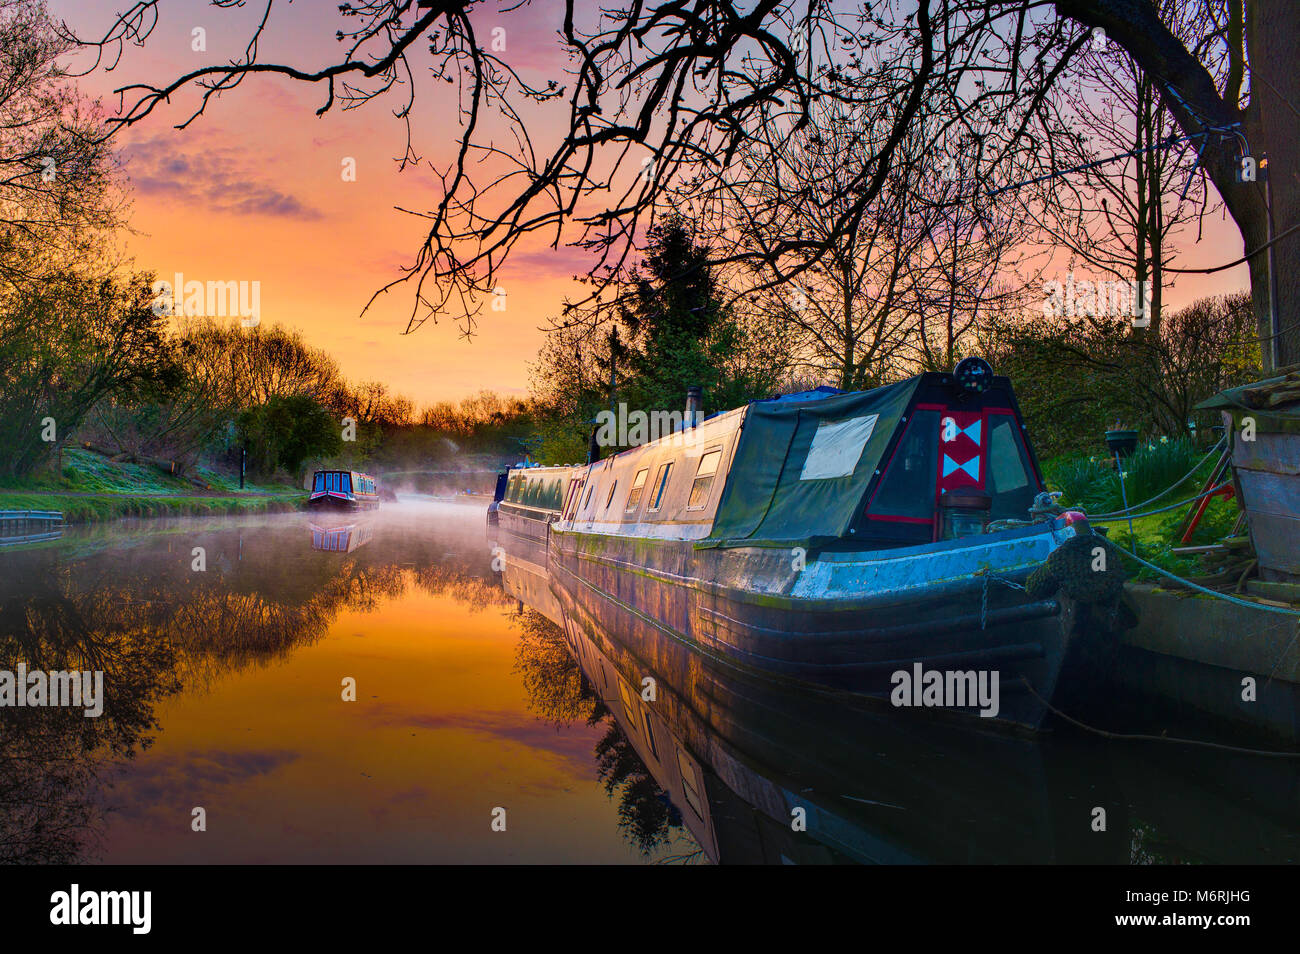 Tranquil reflections and morning mist in the first rays of dawn on the Grand union canal with several narrow boats. Stock Photo